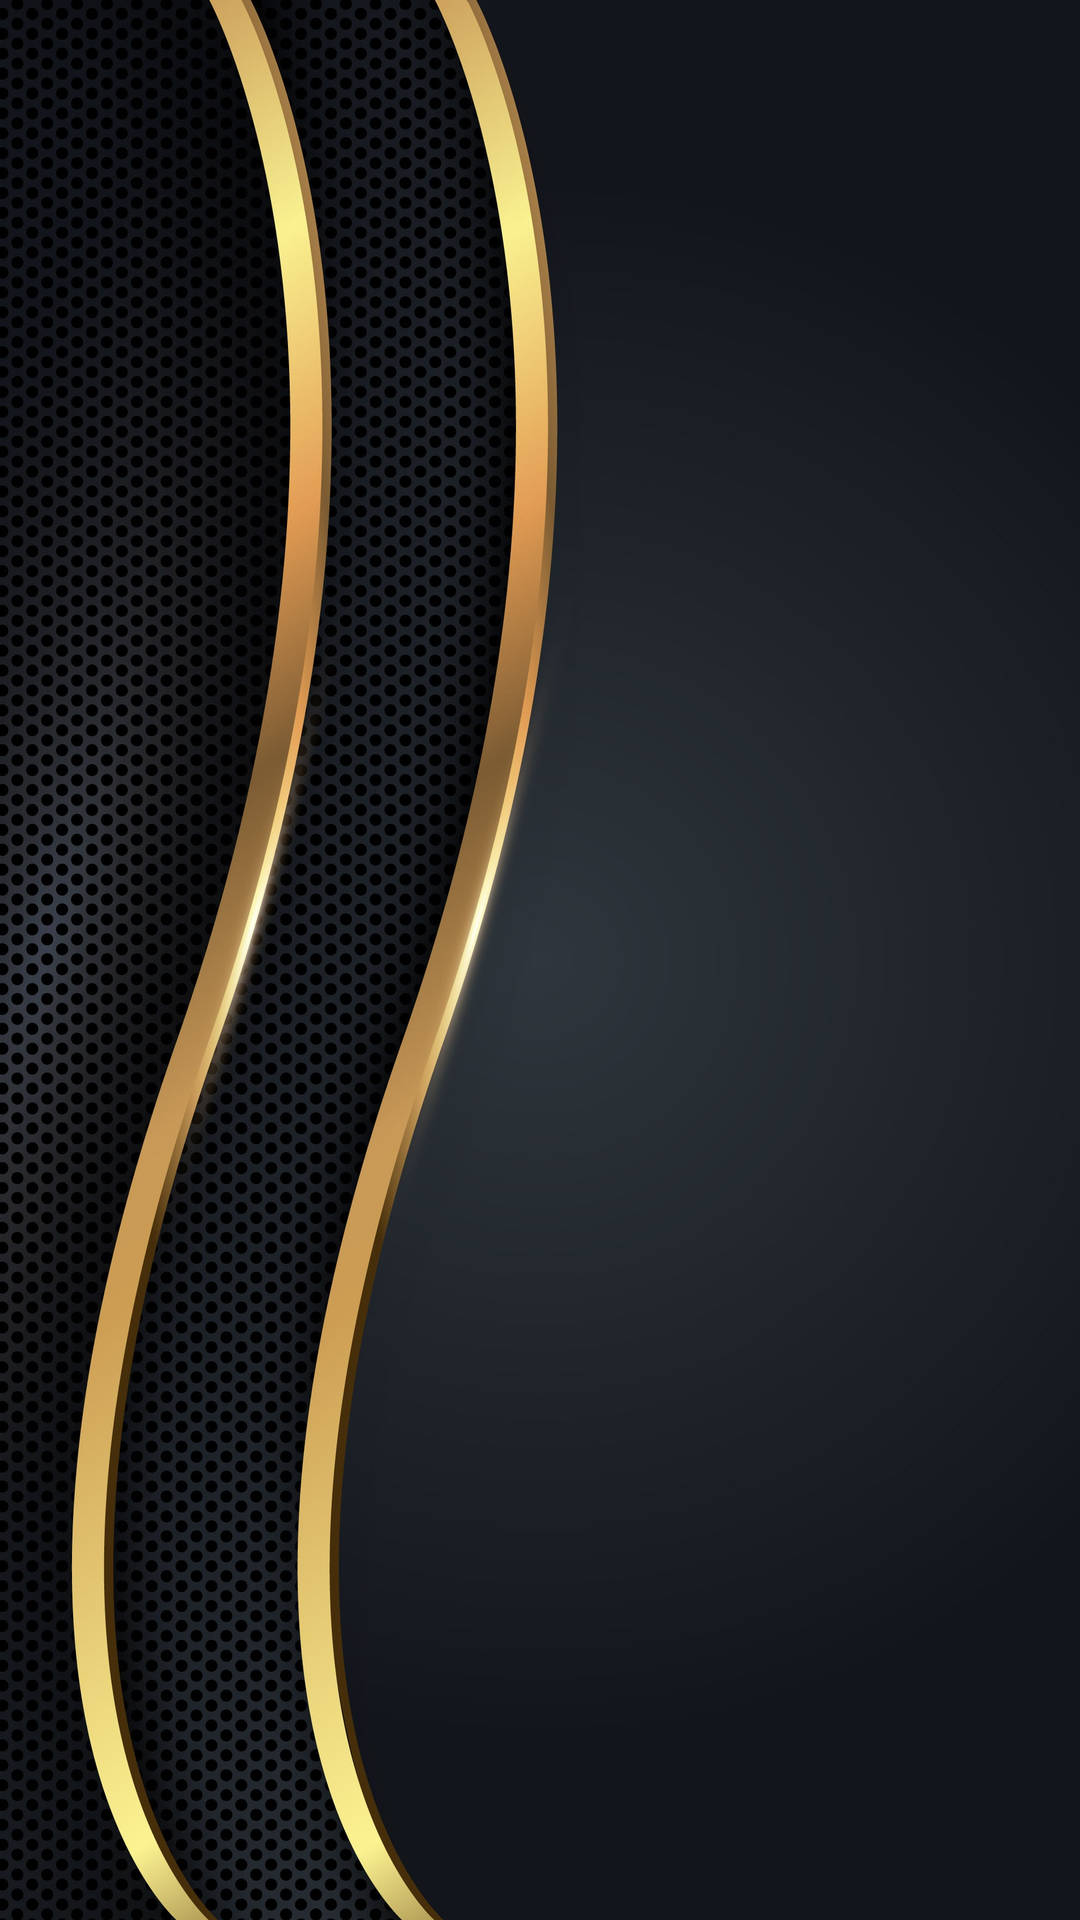 Download Curvy Lines Black And Gold iPhone Wallpaper